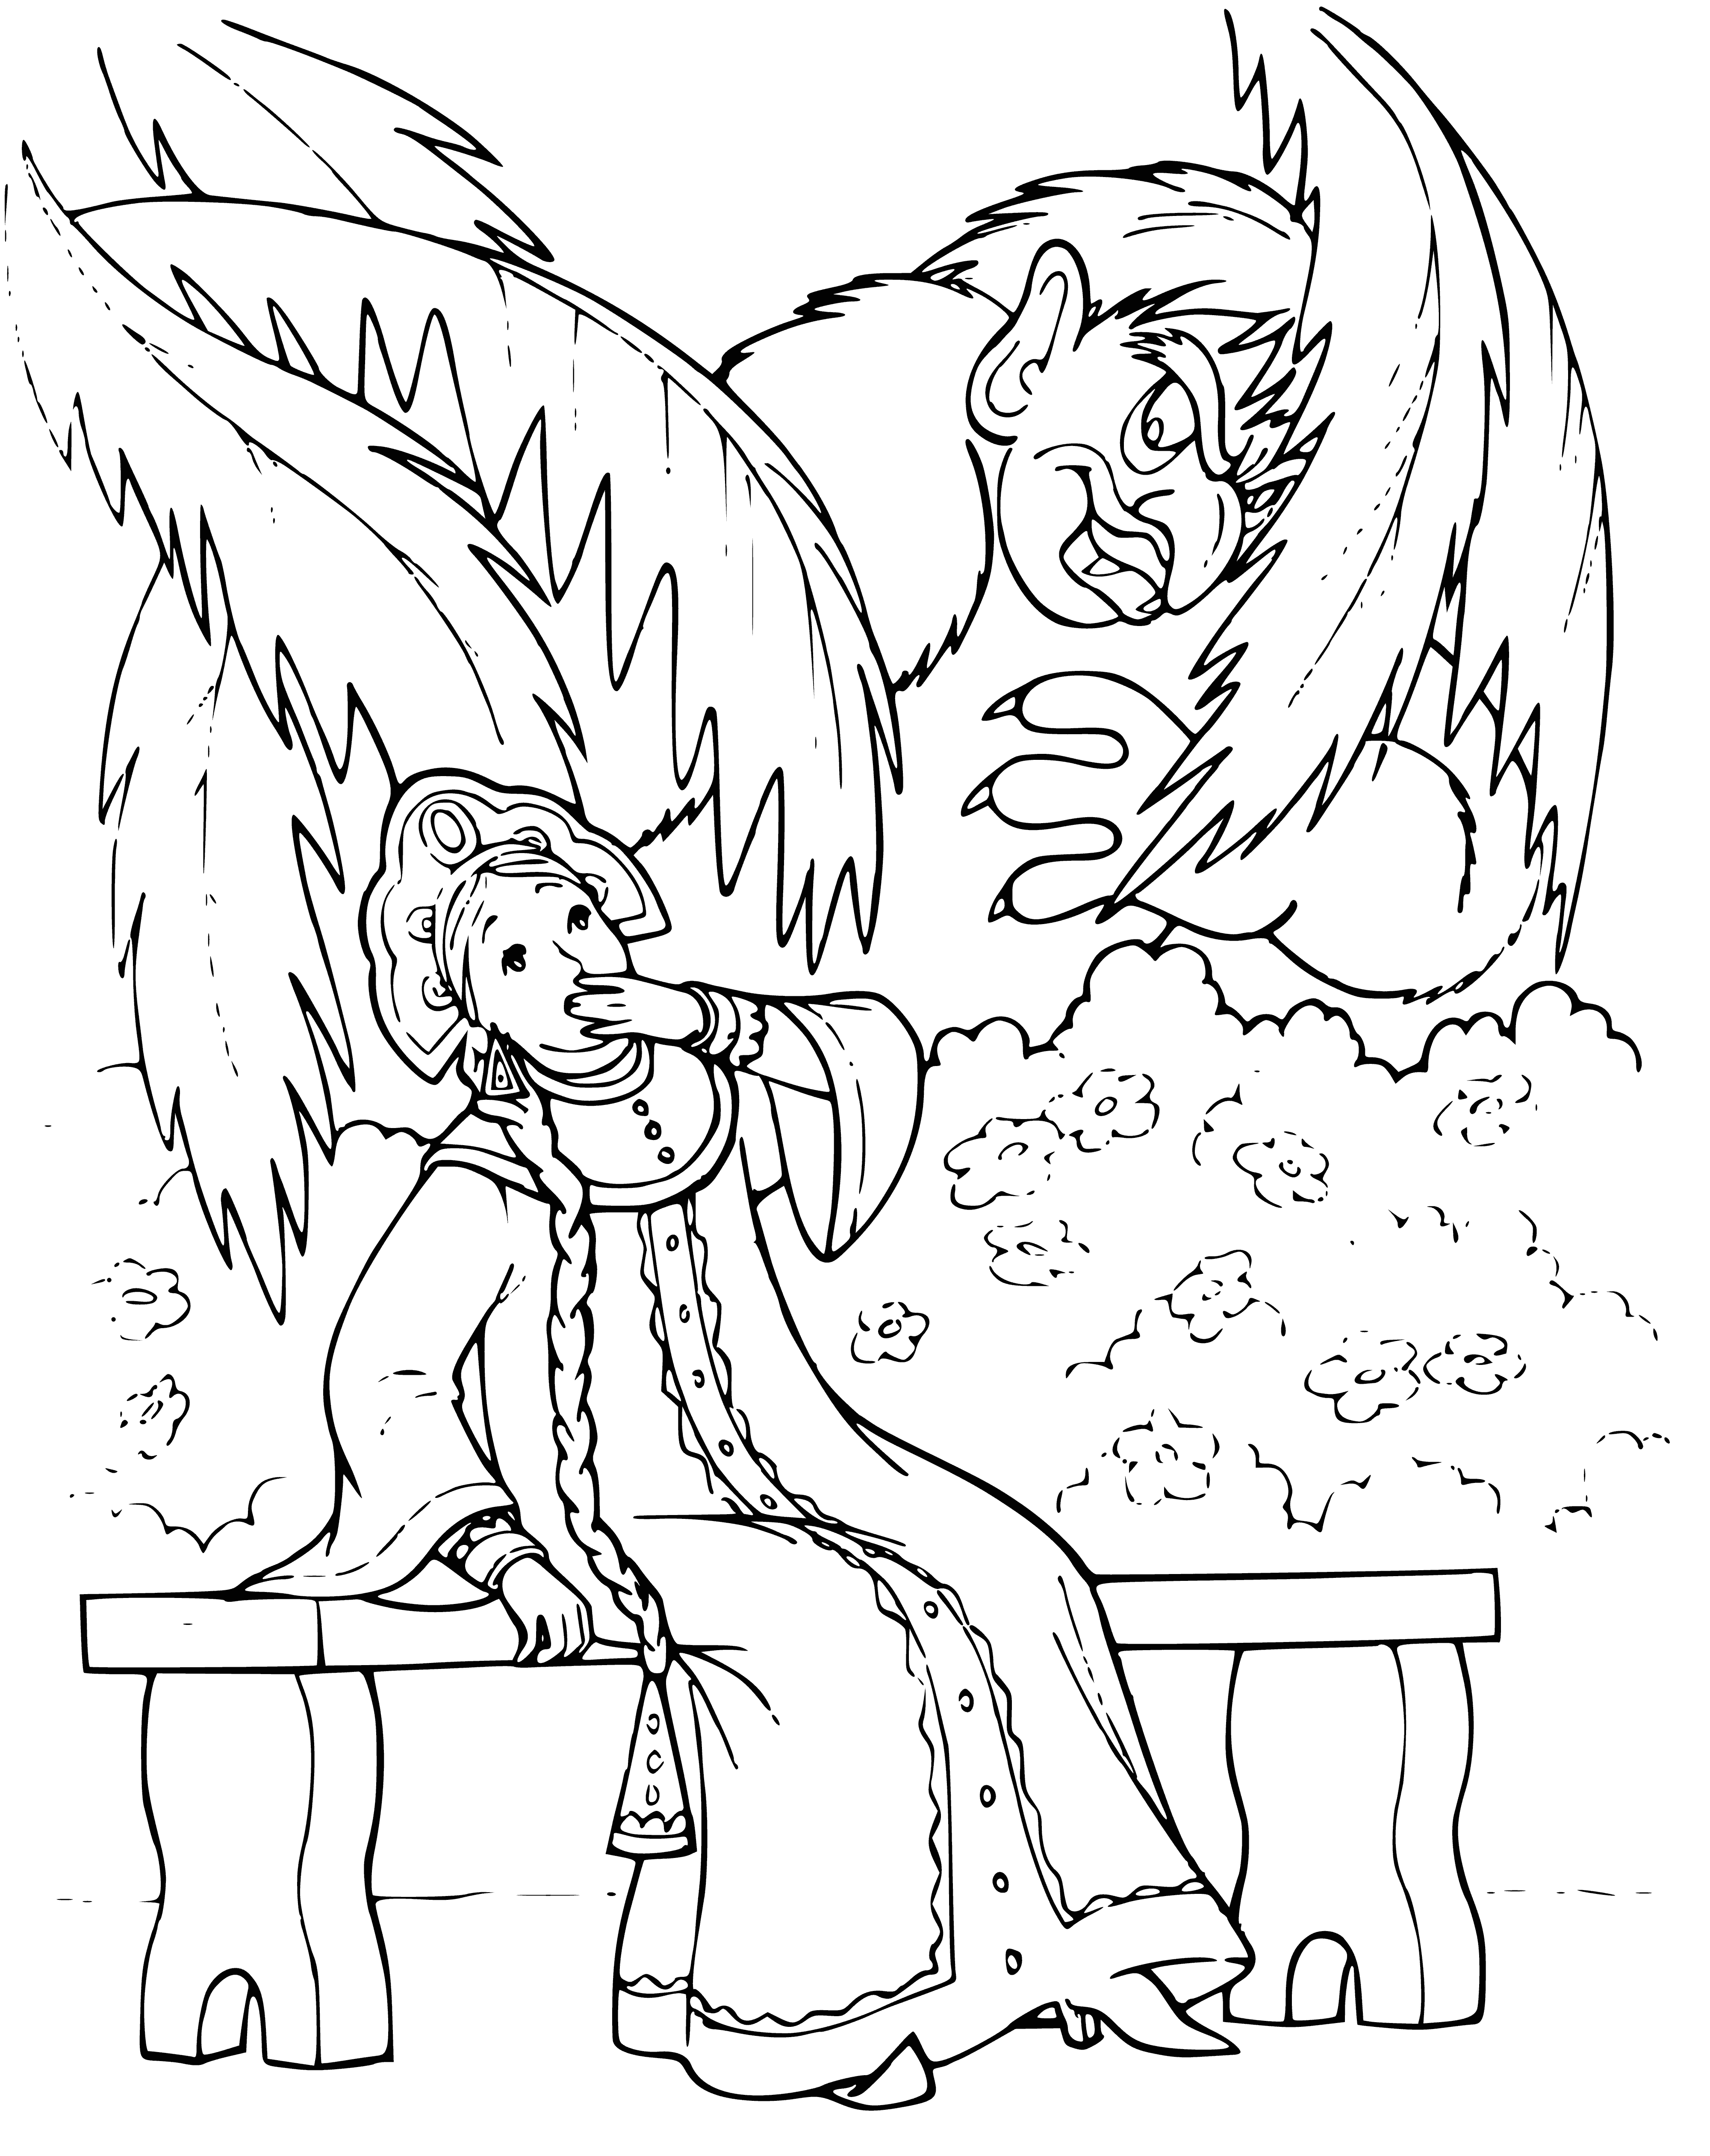 The Scarlet Flower coloring page